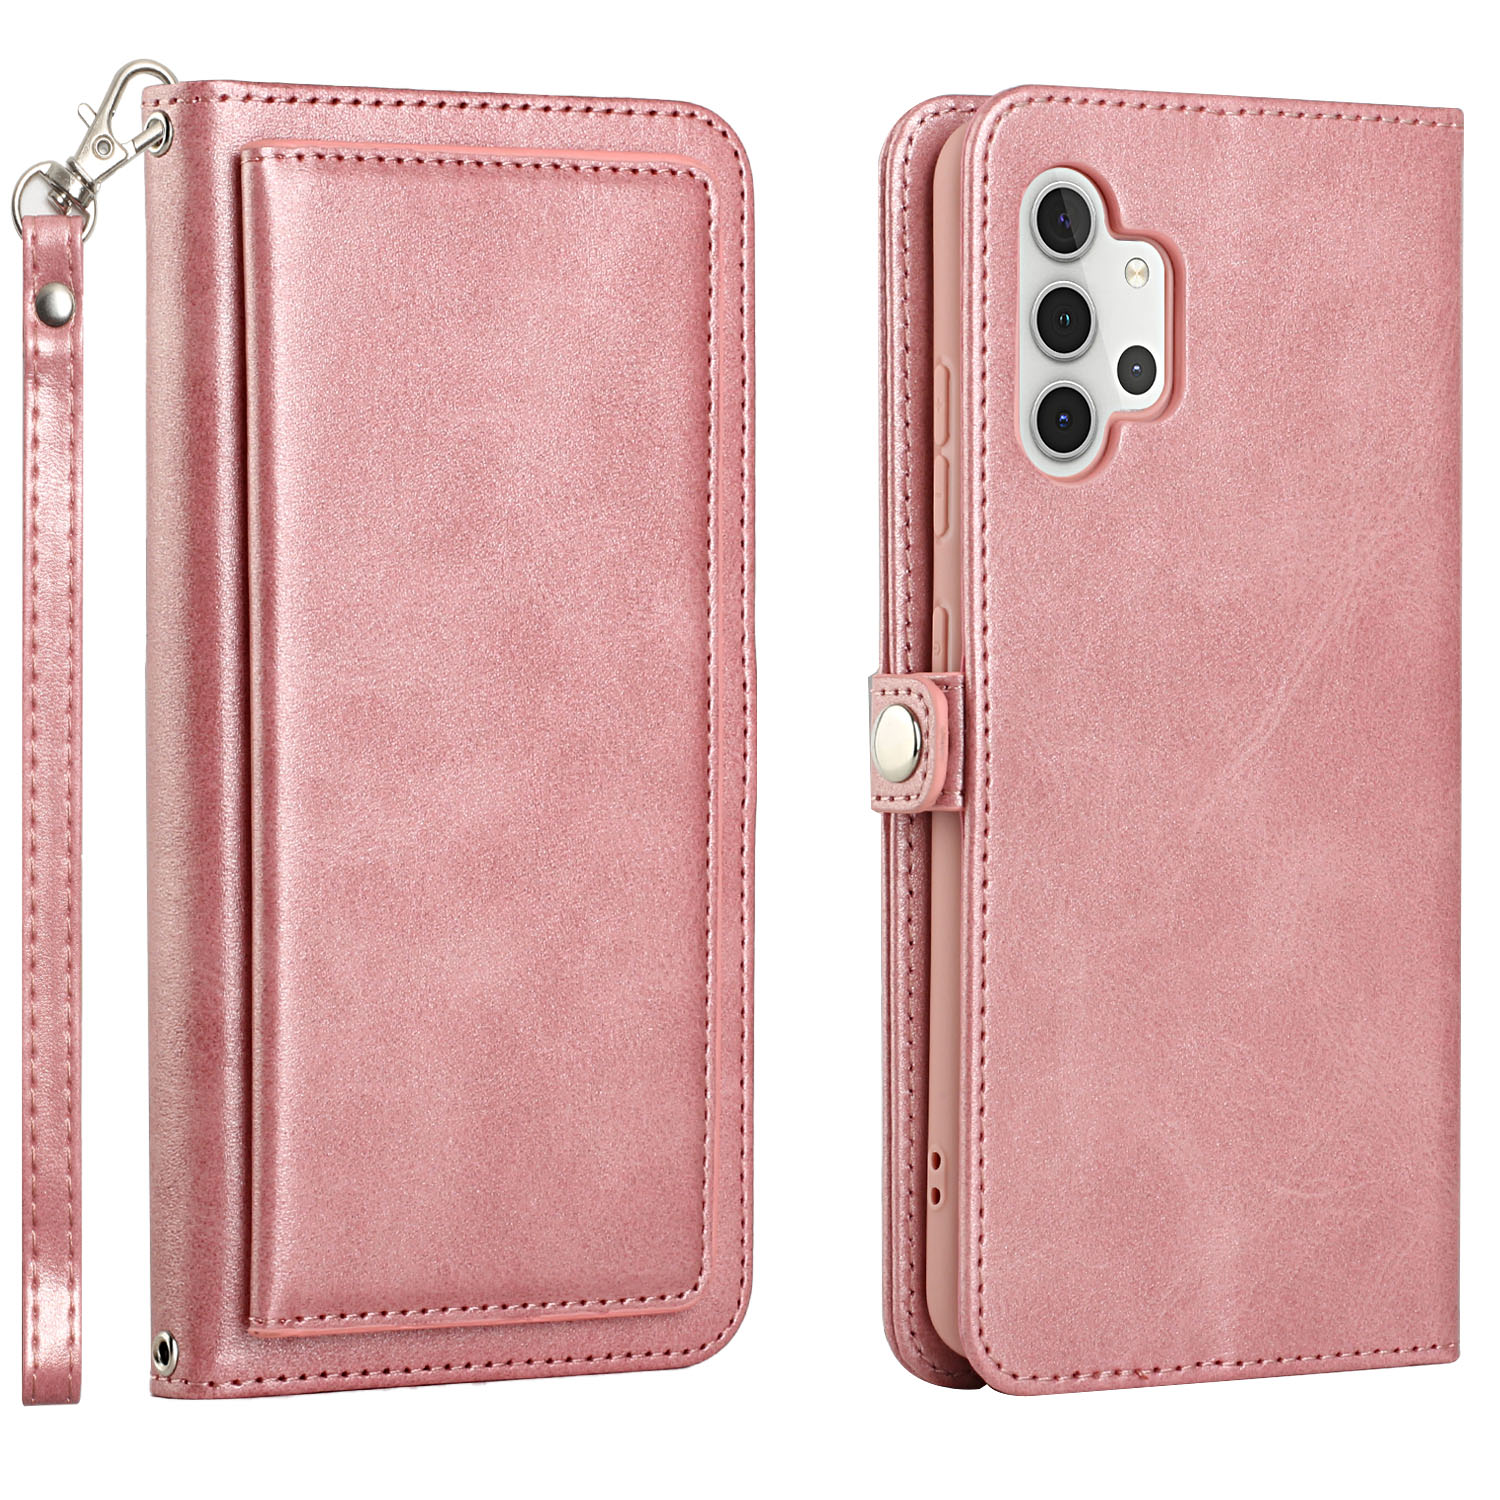 Premium PU Leather Folio WALLET Front Cover Case for Galaxy A32 4G (Pink)